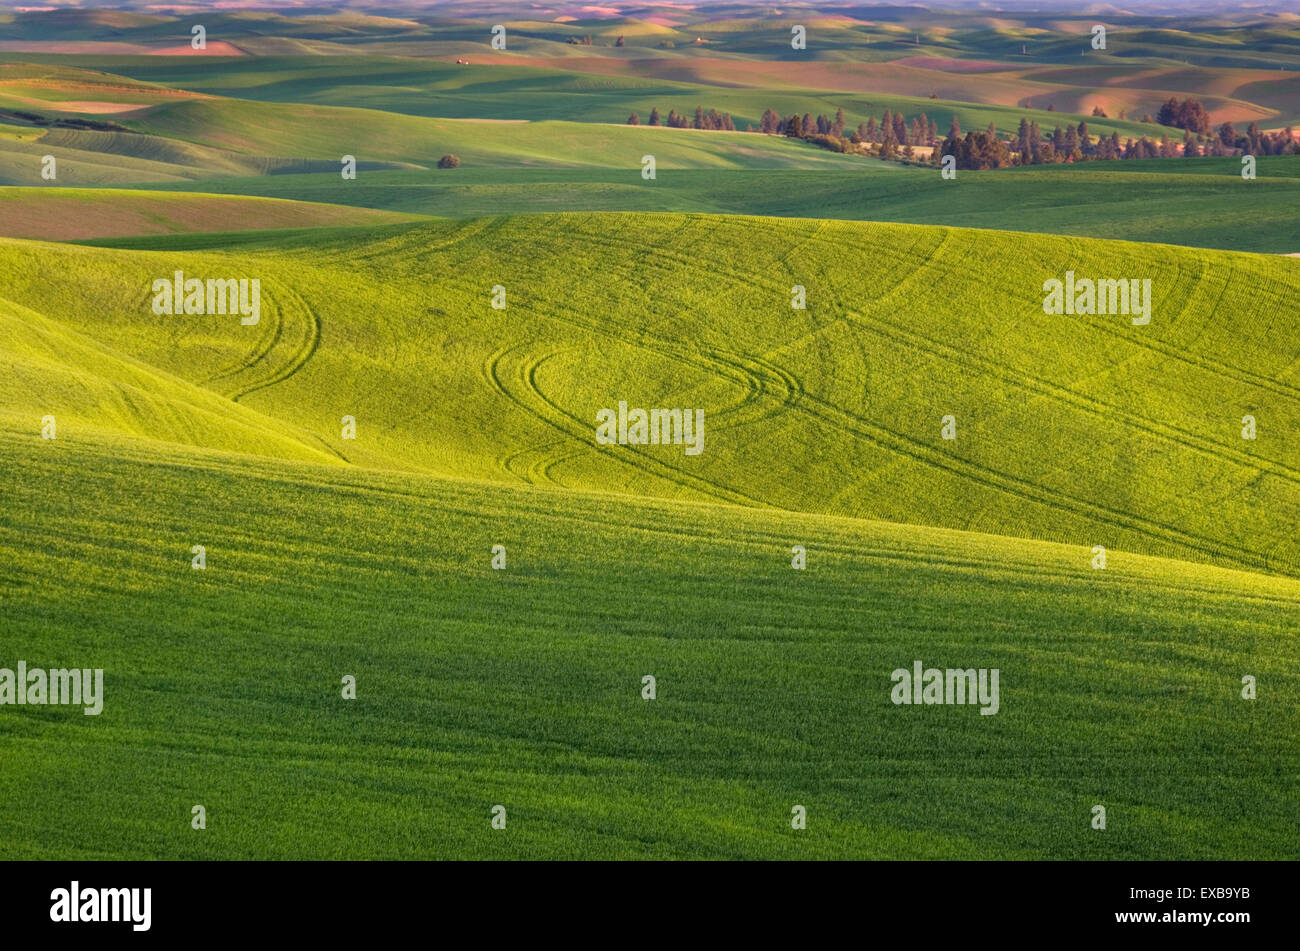 Rolling hills of green wheat fields in the Palouse region of the Inland Empire of Washington Stock Photo